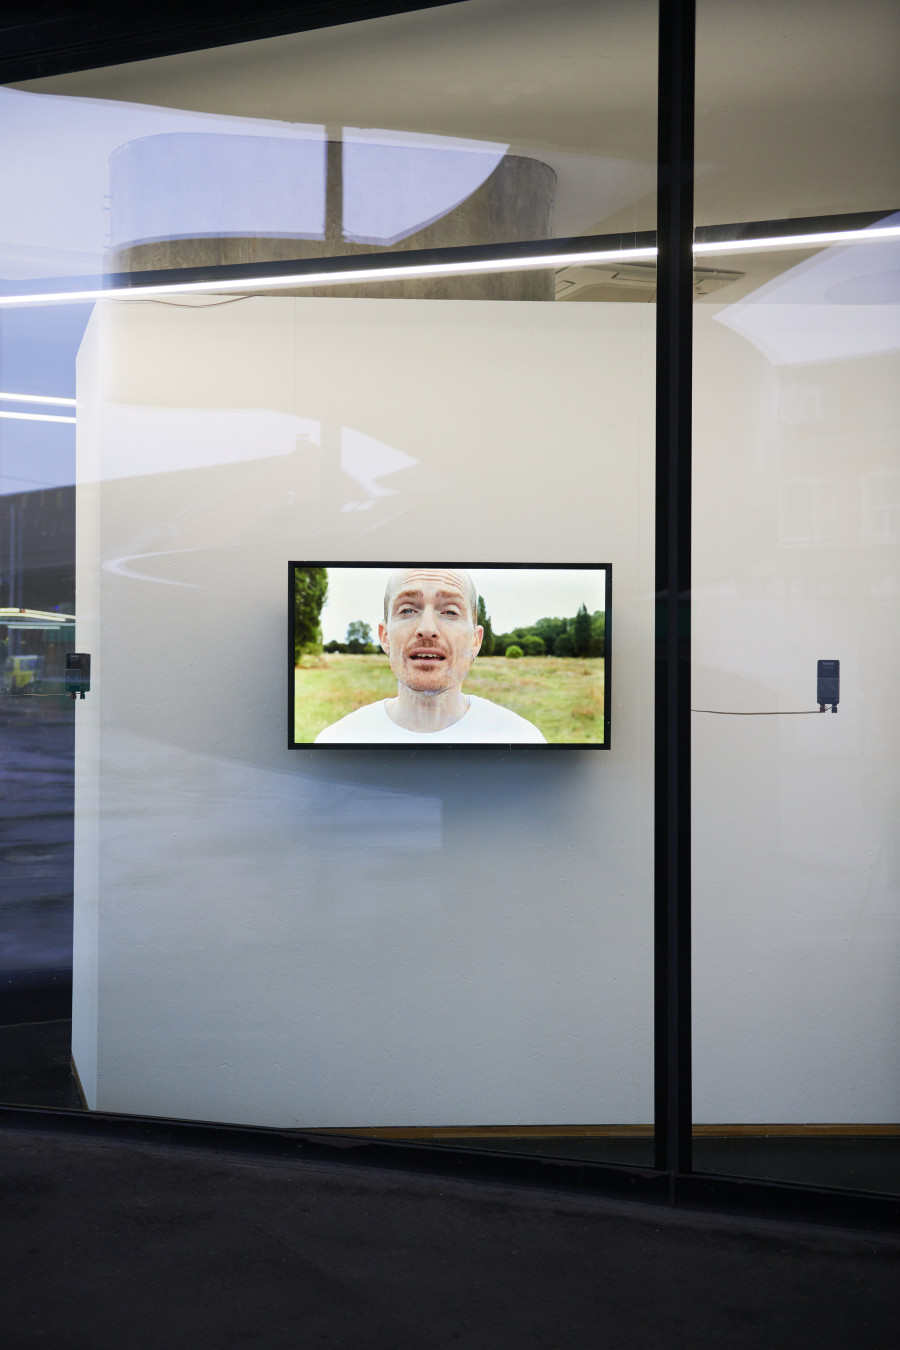 Nicole Bachmann, along the rims, 2020. HD Single Channel Video installed with window speakers. 00:25:00. Courtesy of the artist and VITRINE. Photographer: Nici Jost.